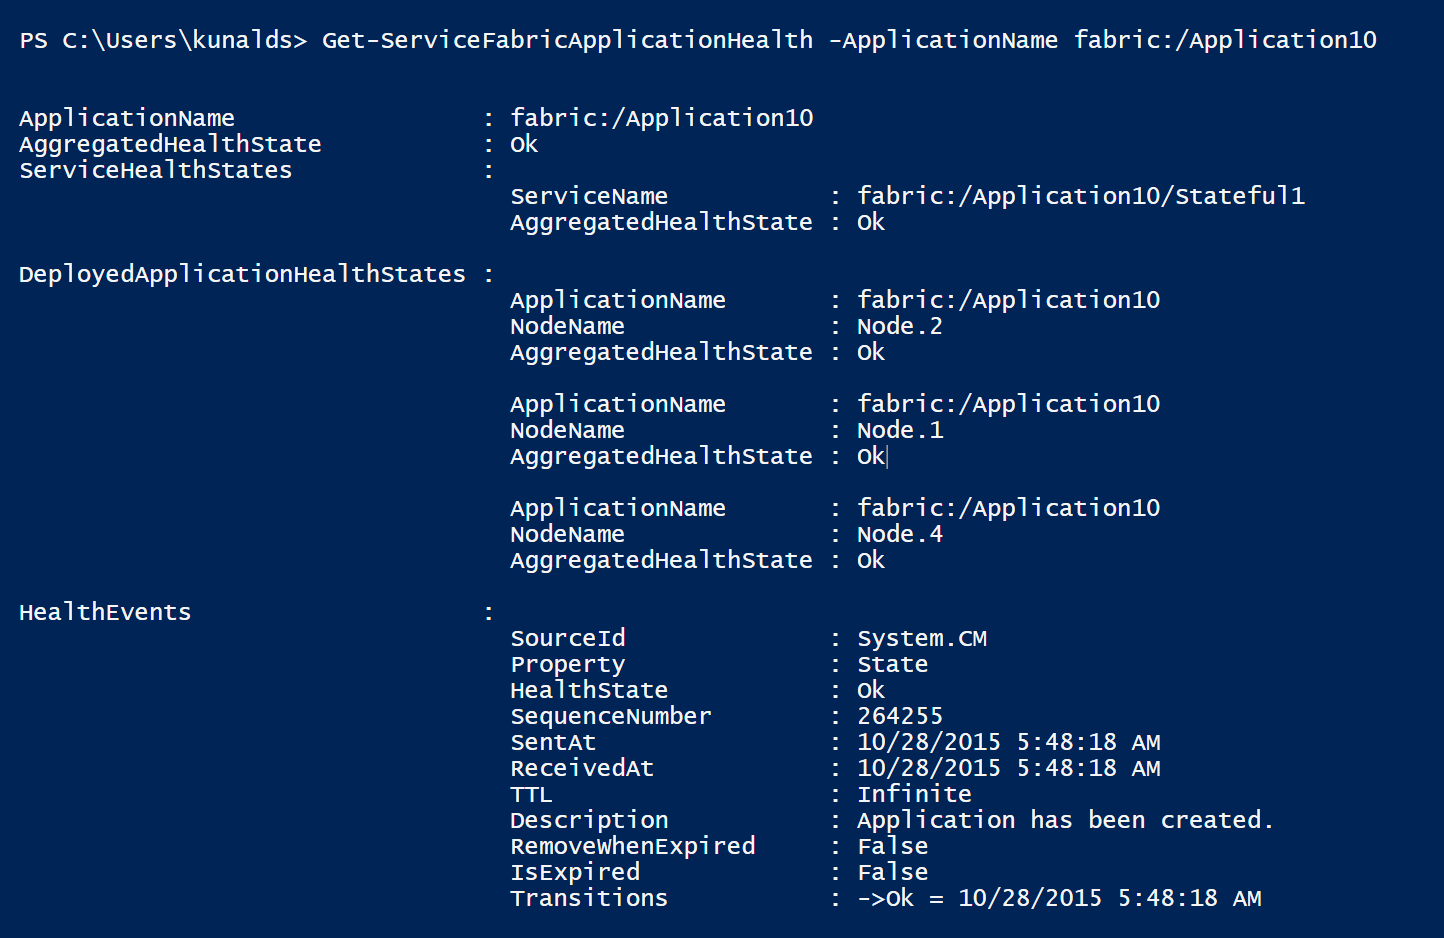 Healthy application in PowerShell